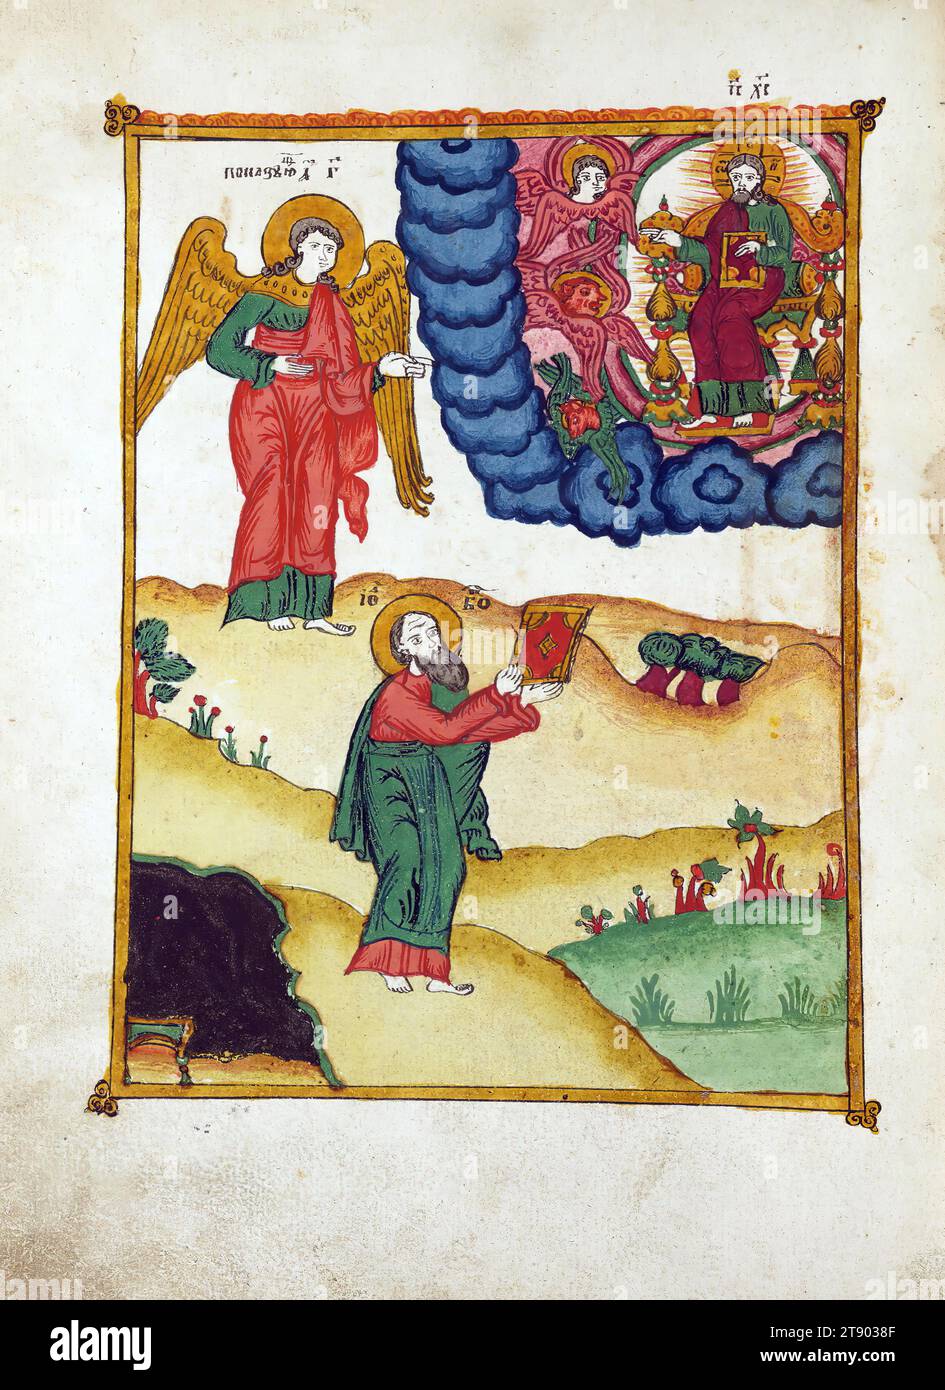 Apocalypse with Patristic commentary, St. John presents his book, This manuscript was made around 1800 by the 'Old Believers,' a group of Russian Christians who dissented from the Russian Orthodox Church and were subsequently persecuted and excommunicated. Because their books were often confiscated and they were forbidden to use printing presses, they continued to write important works such as this one by hand Stock Photo